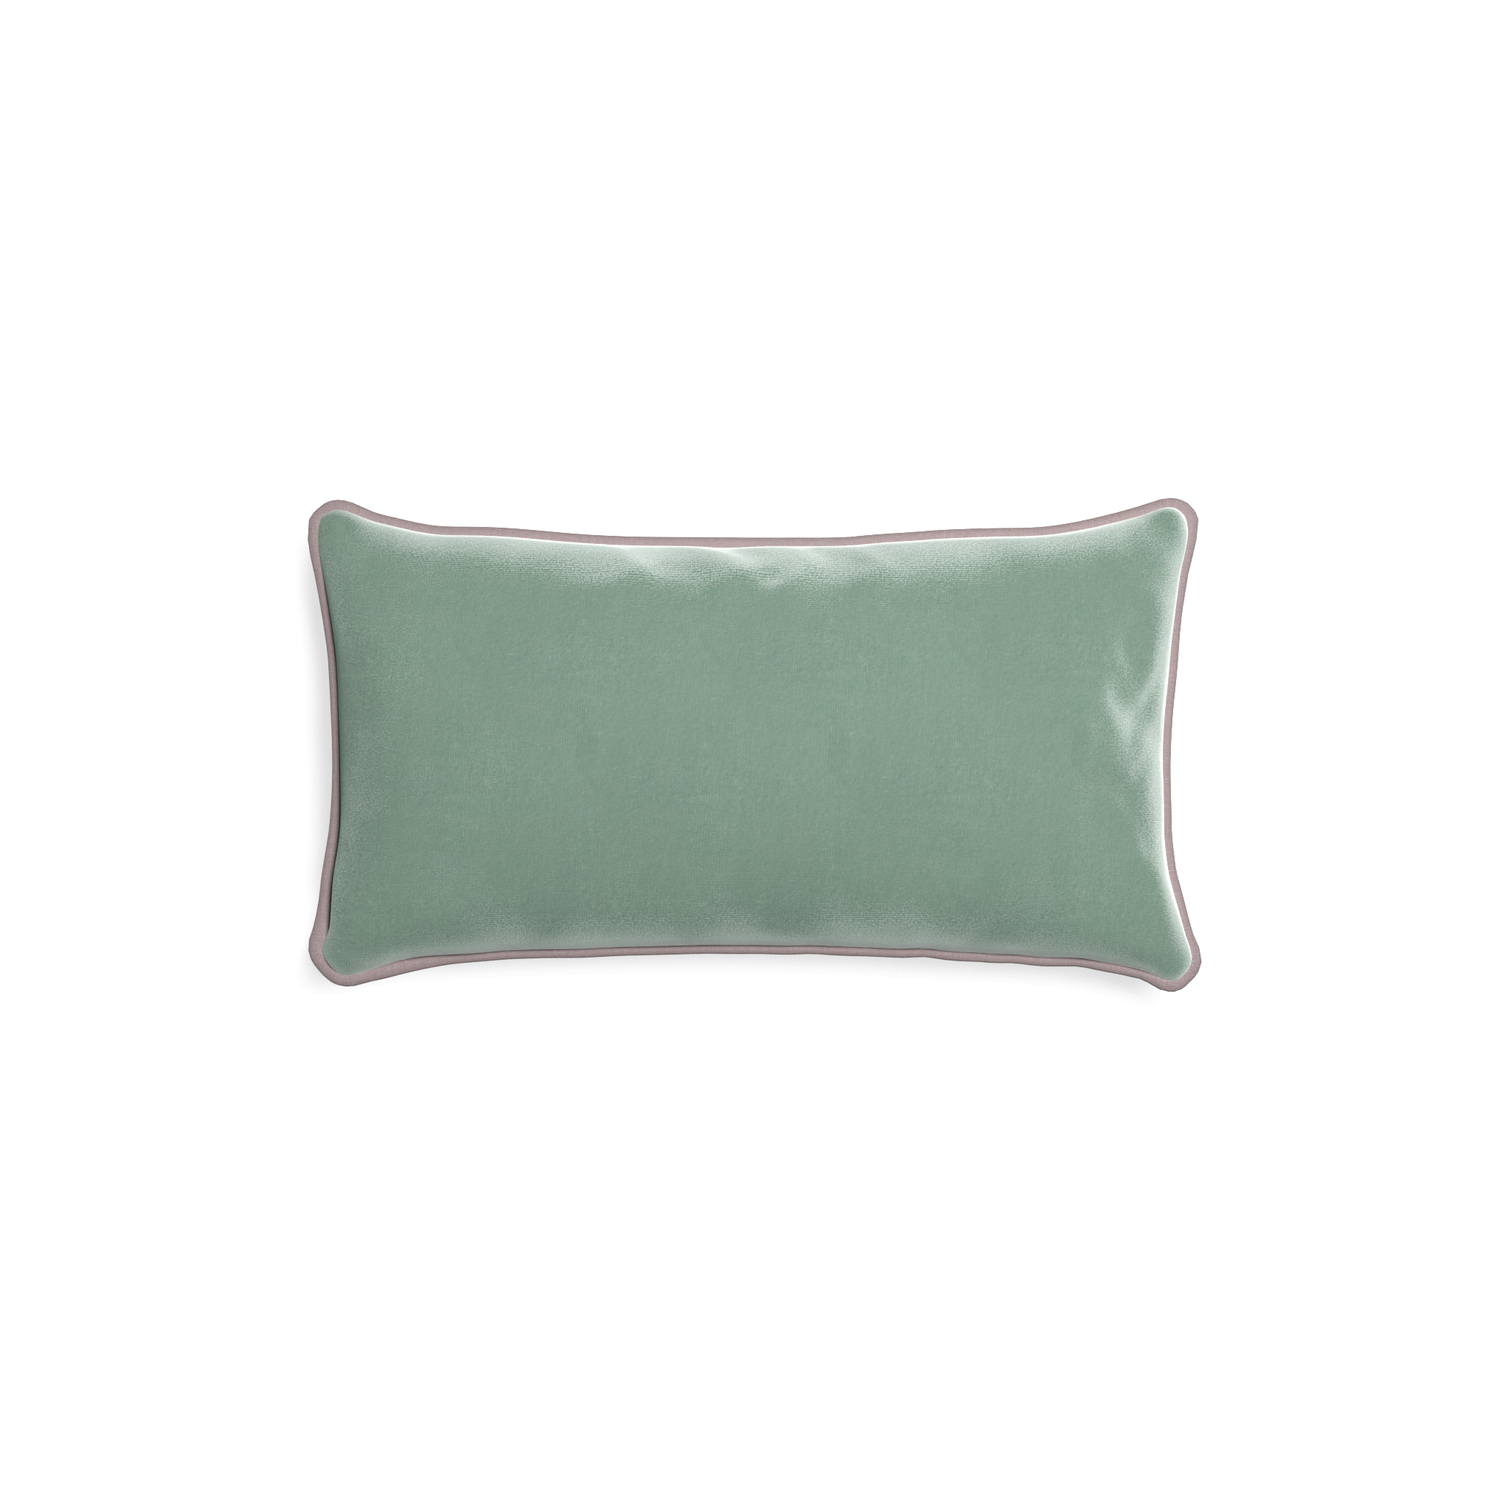 Petite-lumbar sea salt velvet custom blue greenpillow with orchid piping on white background